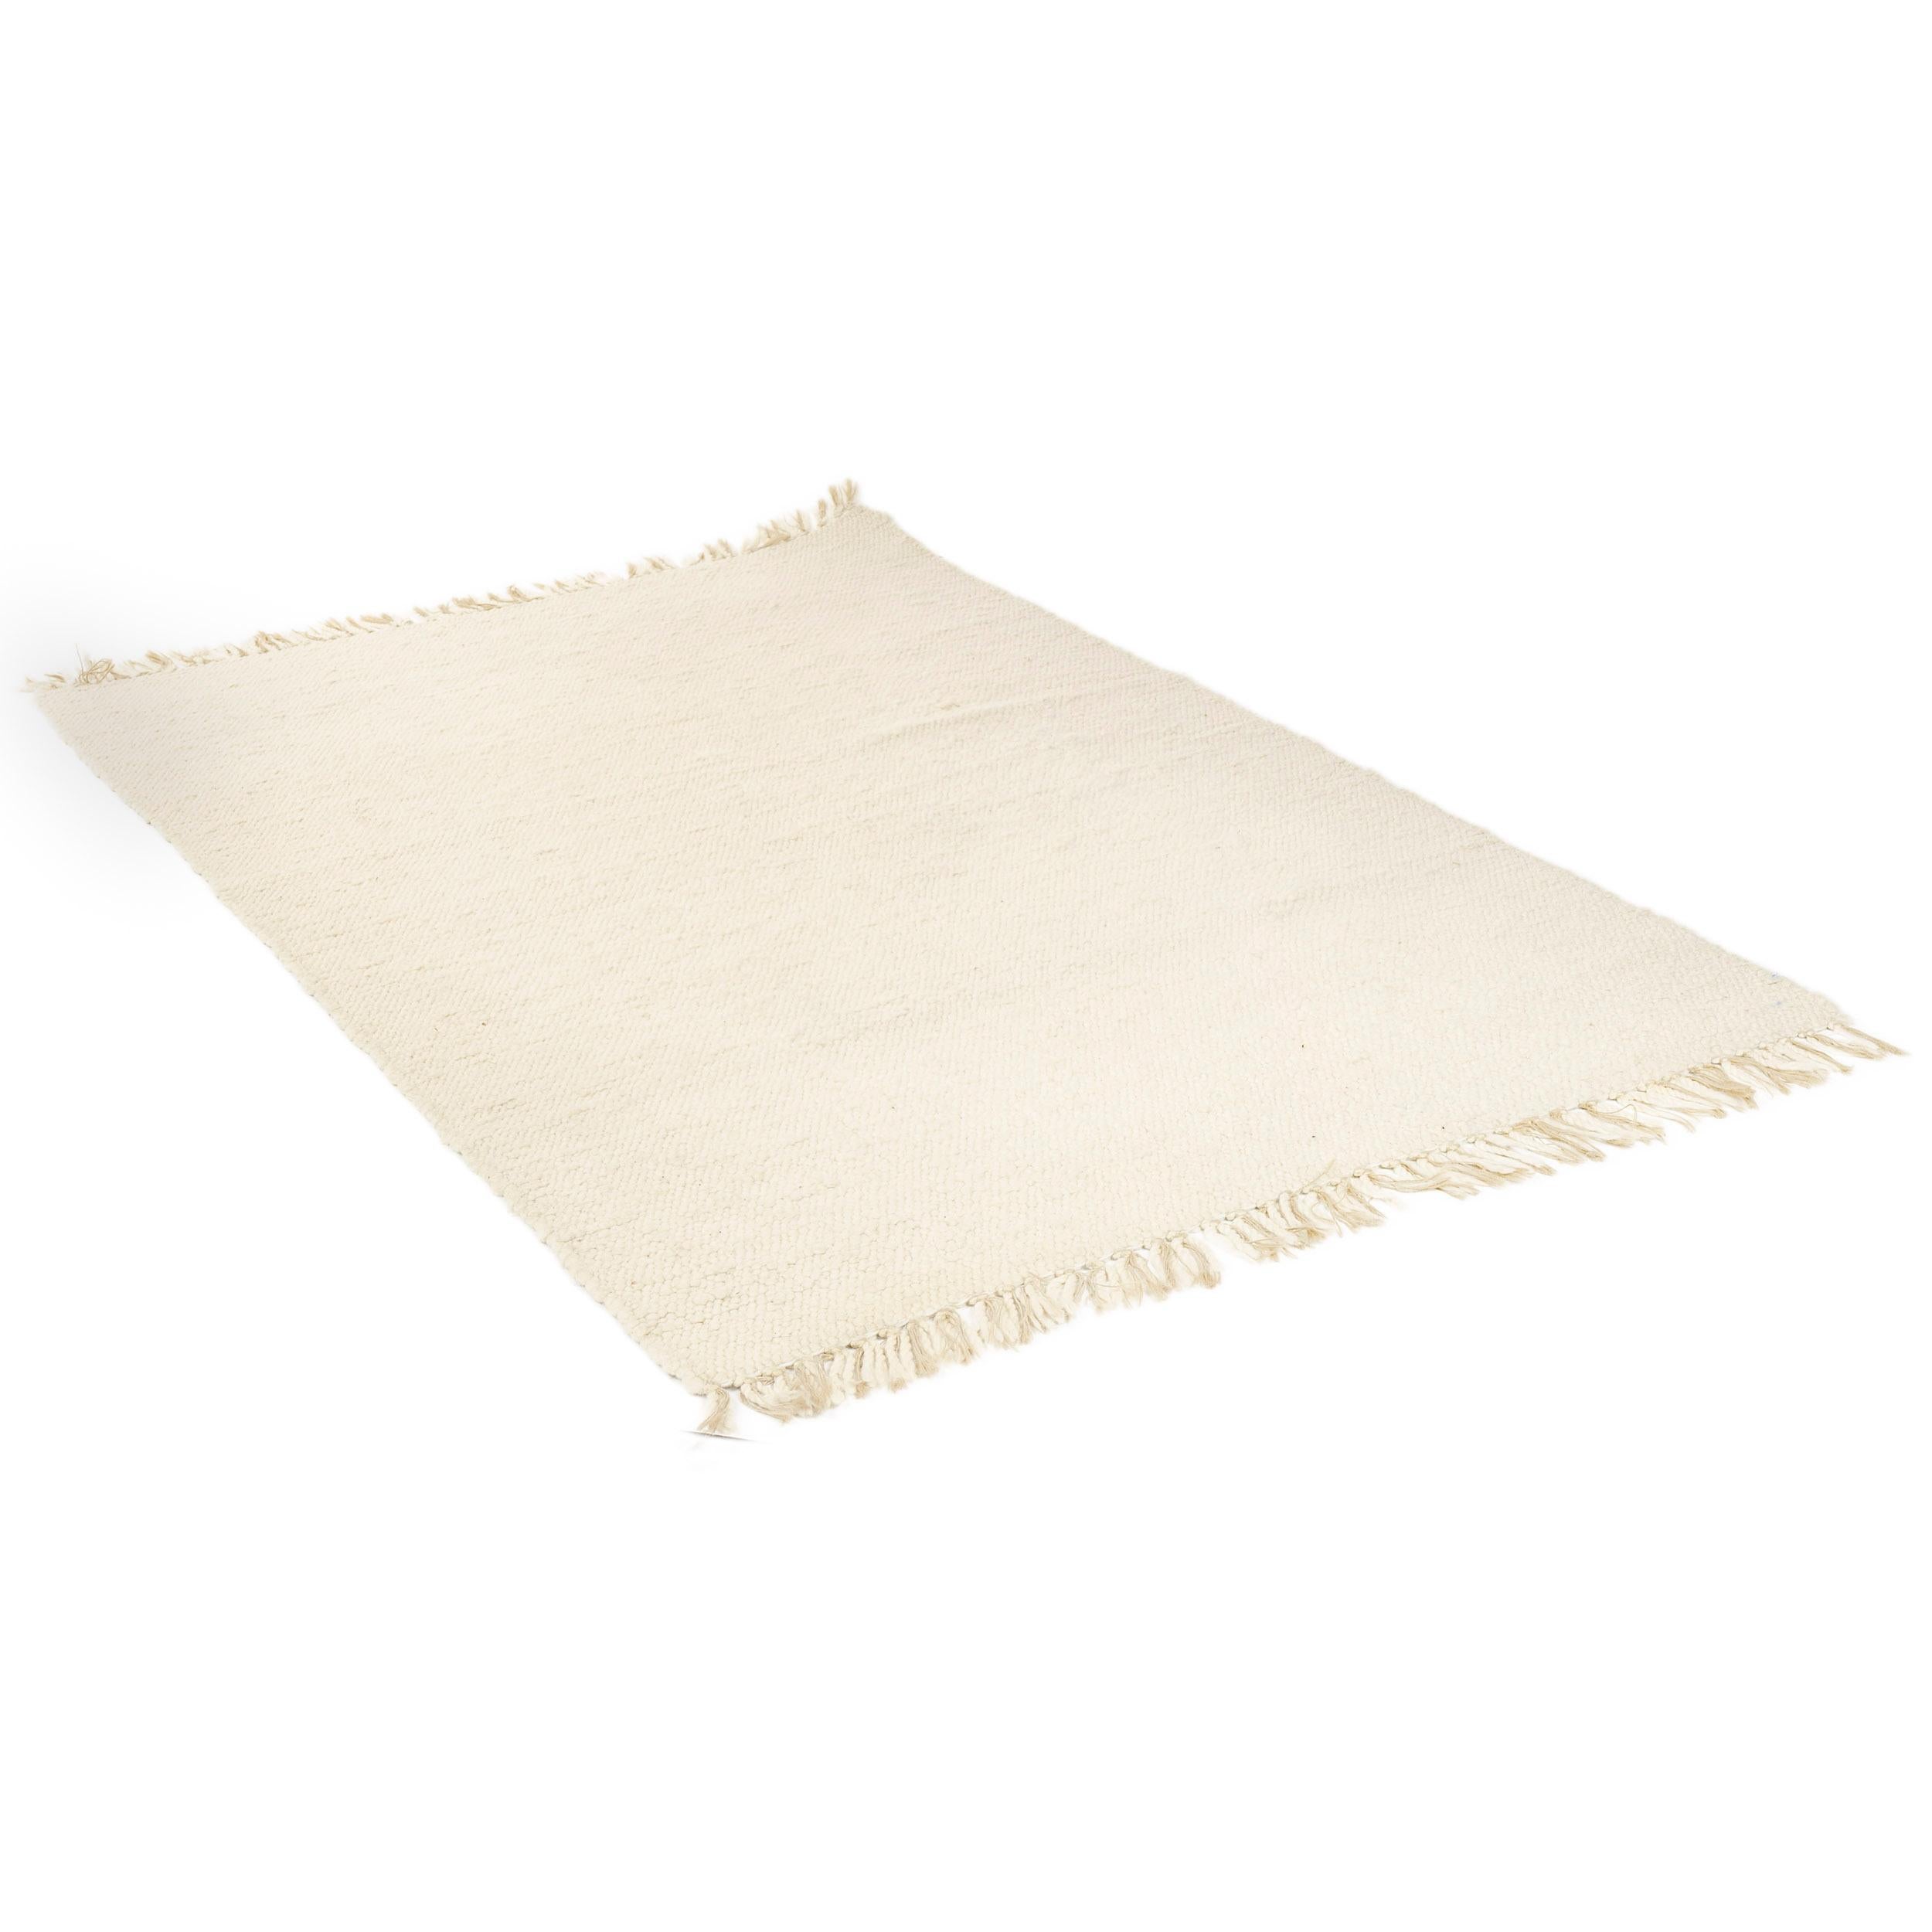 An off-white wool twist-yarn rug, woven on a loom and finished with hand knotted wool and hemp ties.